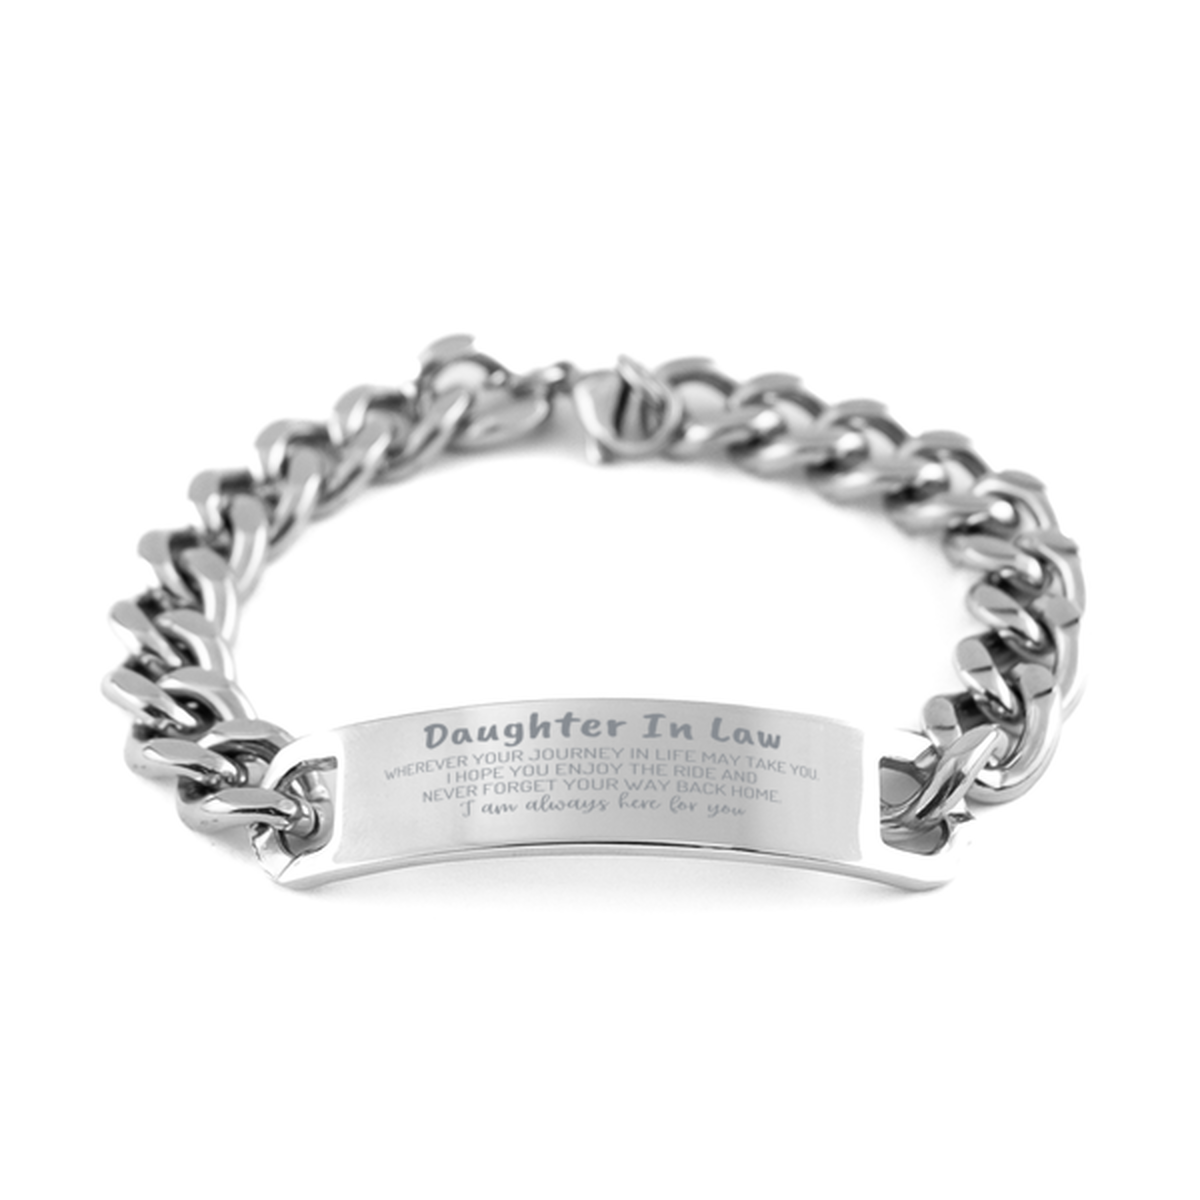 Daughter In Law wherever your journey in life may take you, I am always here for you Daughter In Law Cuban Chain Stainless Steel Bracelet, Awesome Christmas Gifts For Daughter In Law, Daughter In Law Birthday Gifts for Men Women Family Loved One